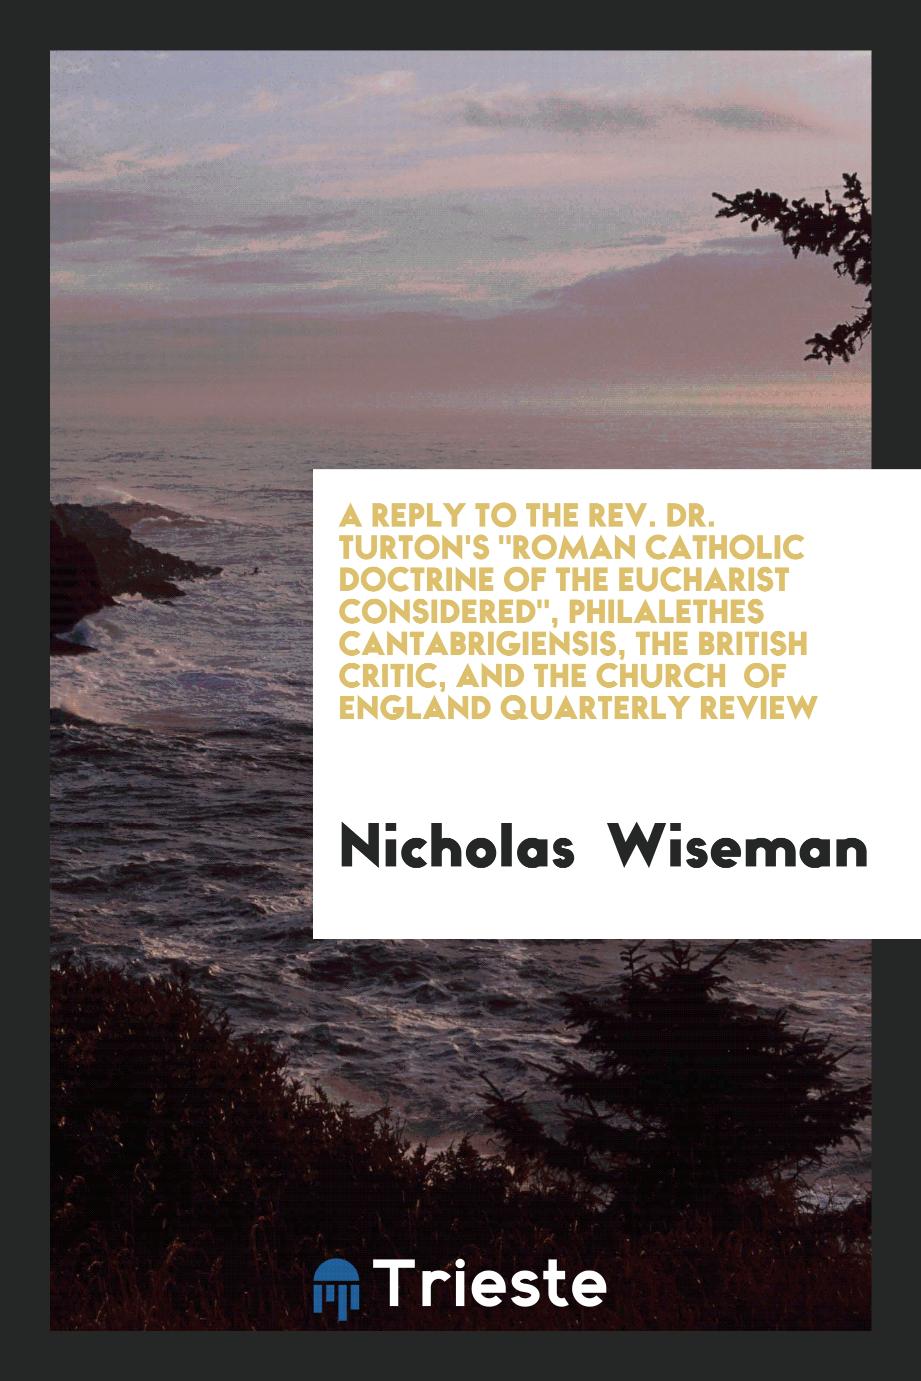 A reply to the Rev. Dr. Turton's "Roman Catholic Doctrine of the Eucharist considered", philalethes cantabrigiensis, the british critic, and the church of England quarterly review